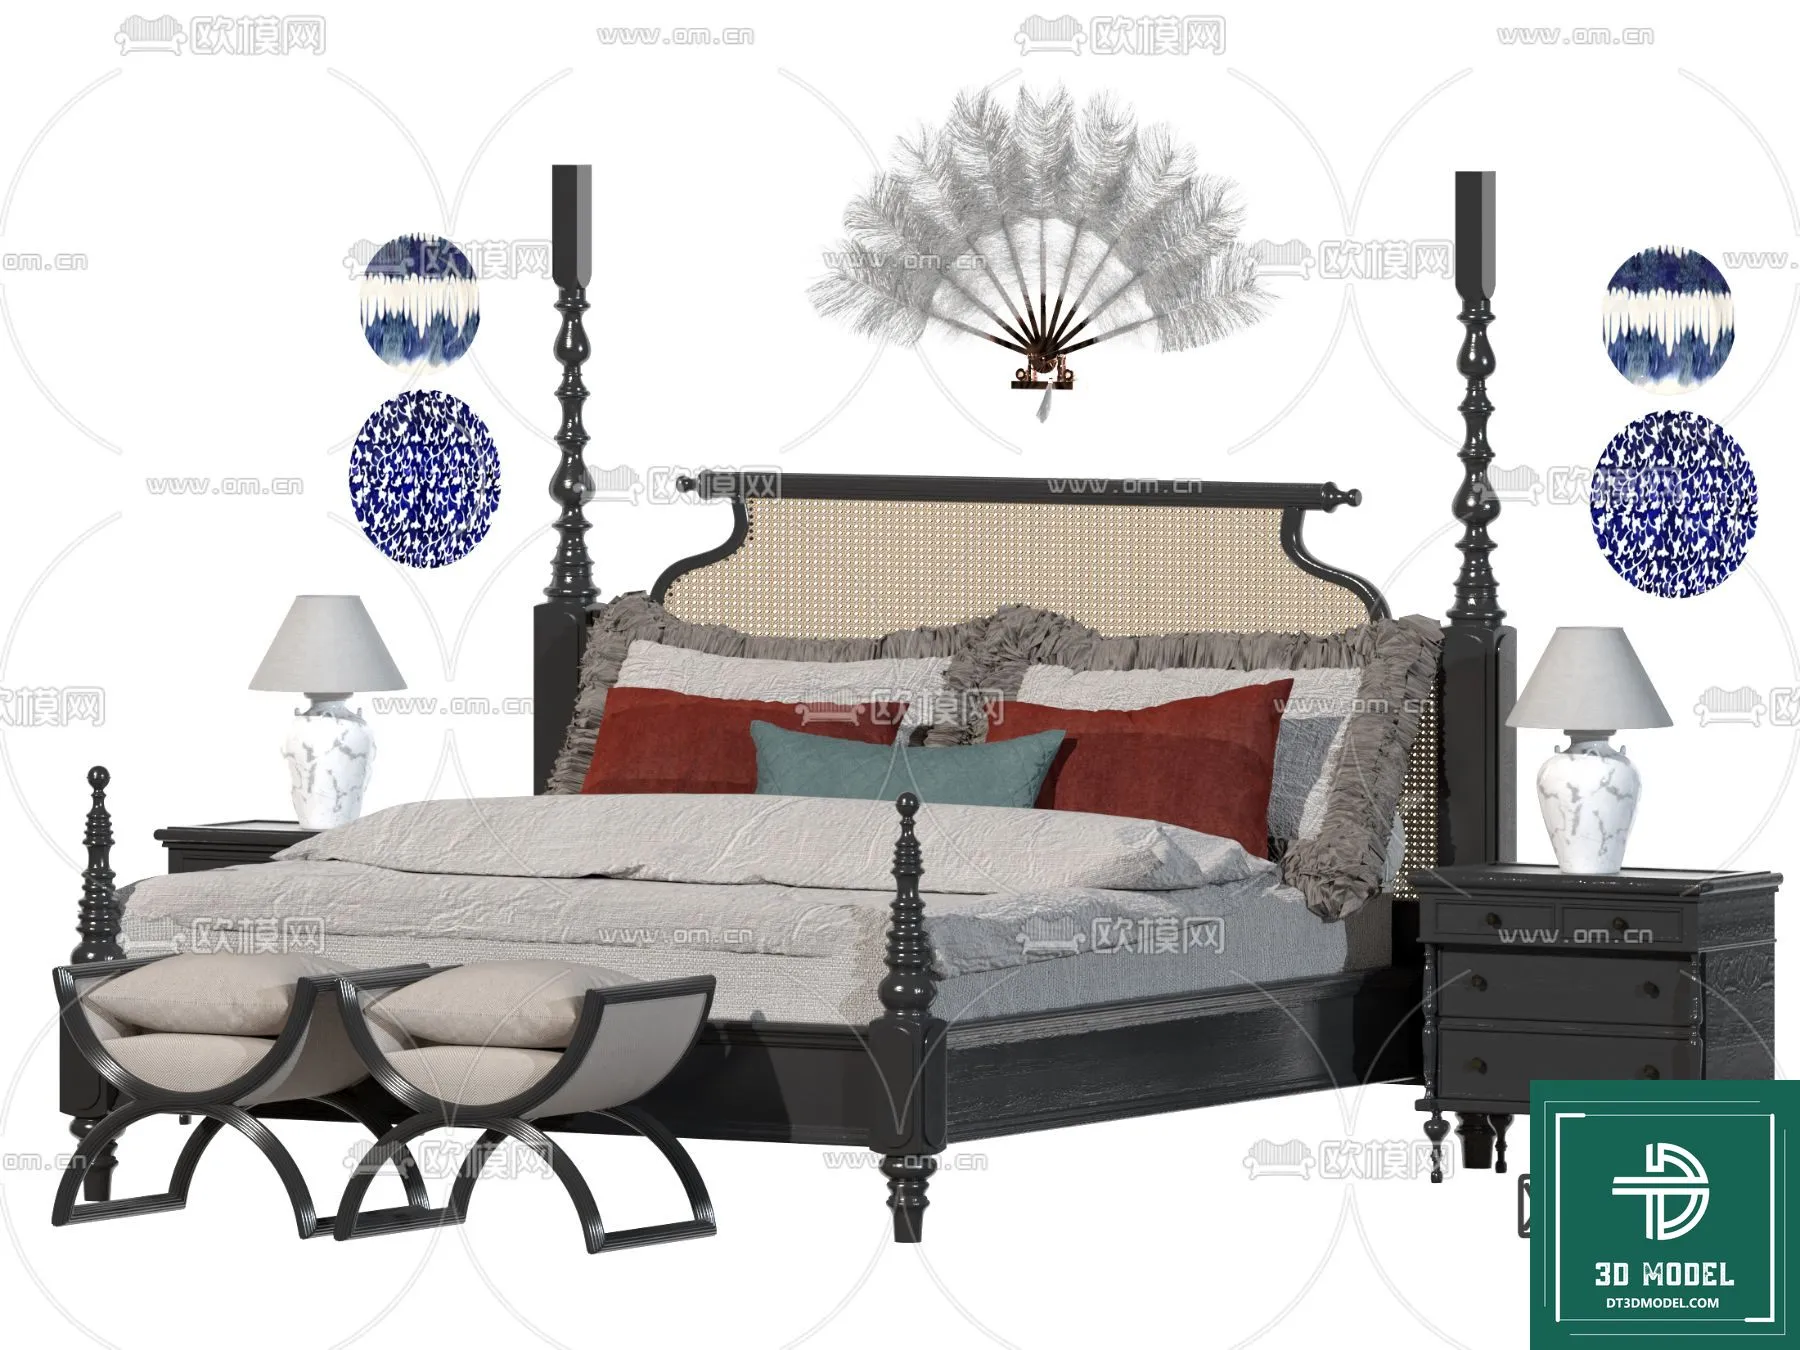 INDOCHINE STYLE – 3D MODELS – 594